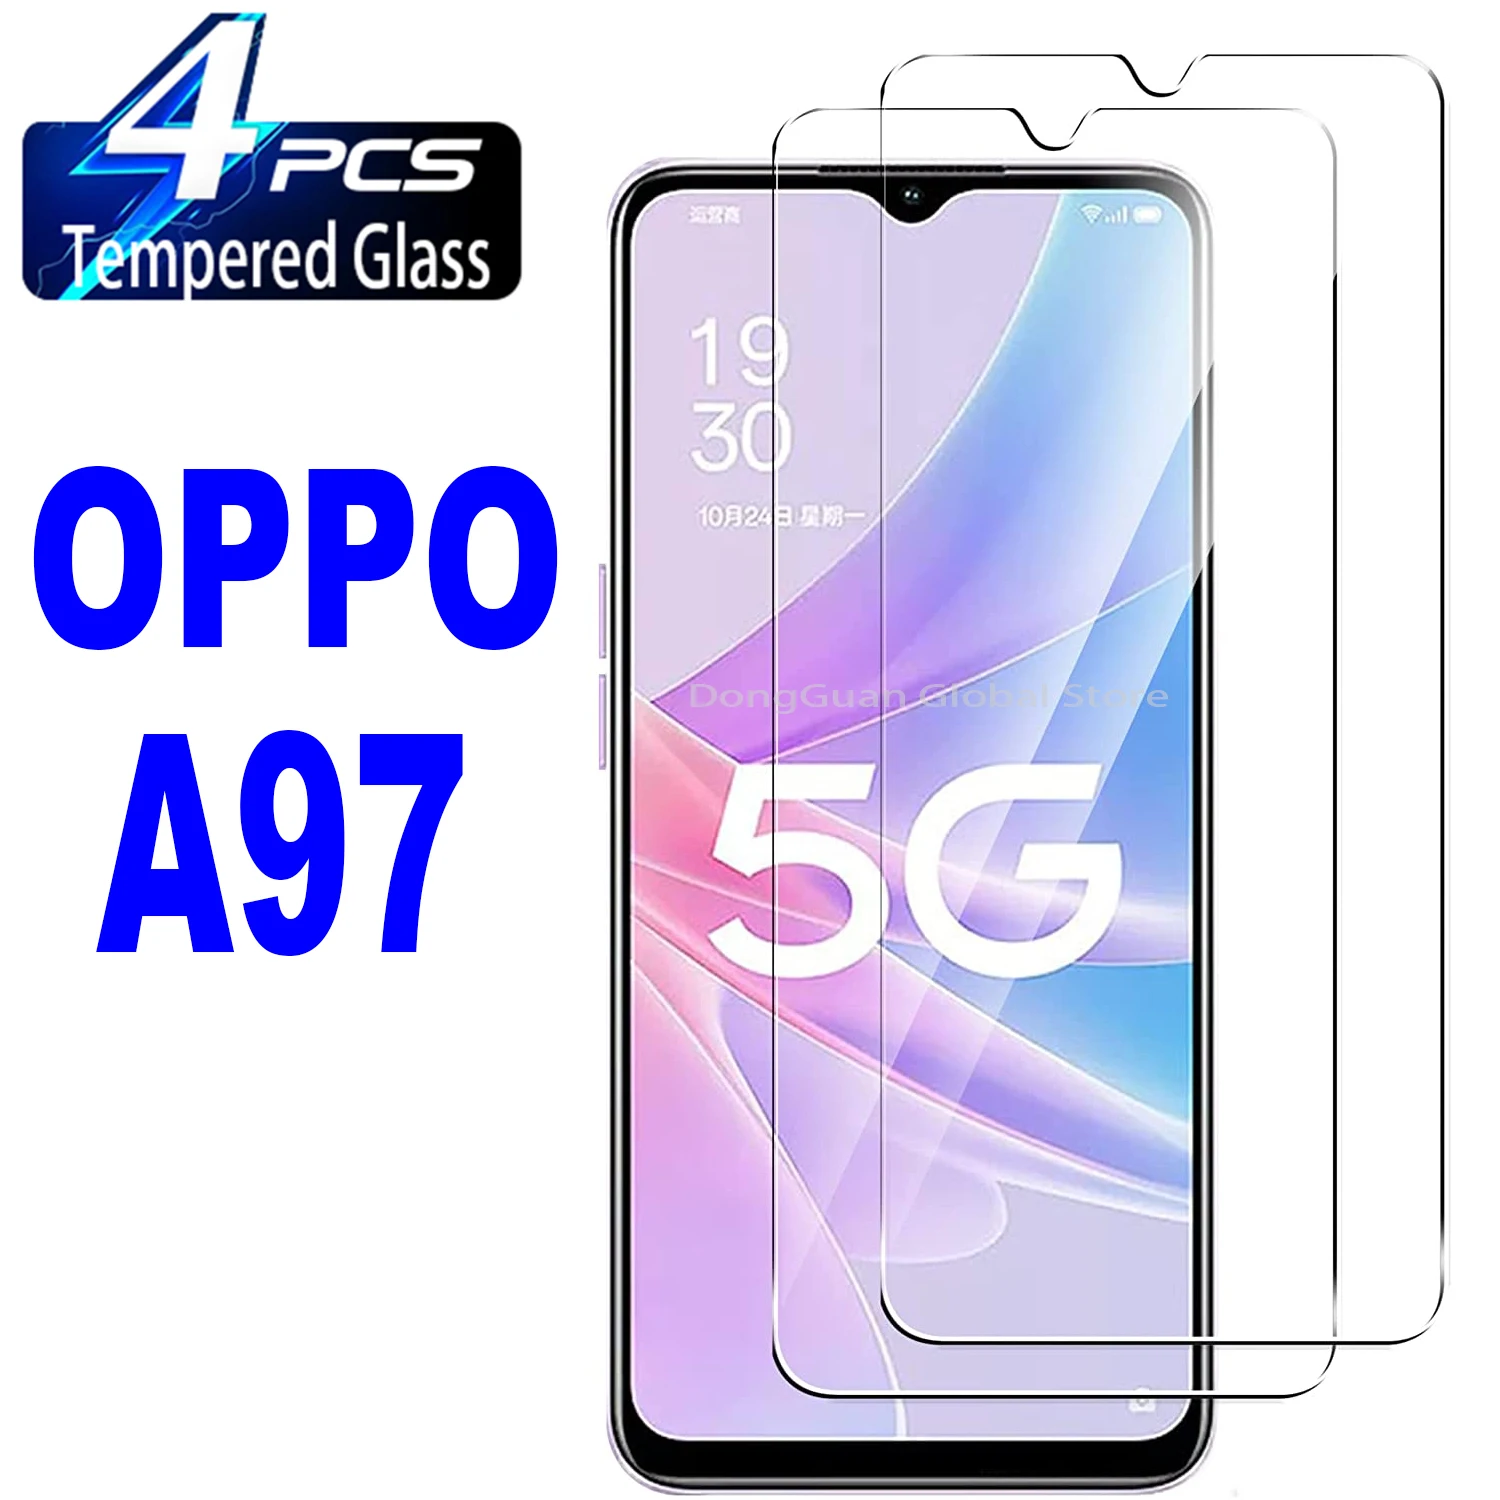 2/4Pcs Tempered Glass For OPPO A97 Screen Protector Glass Film 2 4pcs tempered glass for motorola moto g72 screen protector glass film